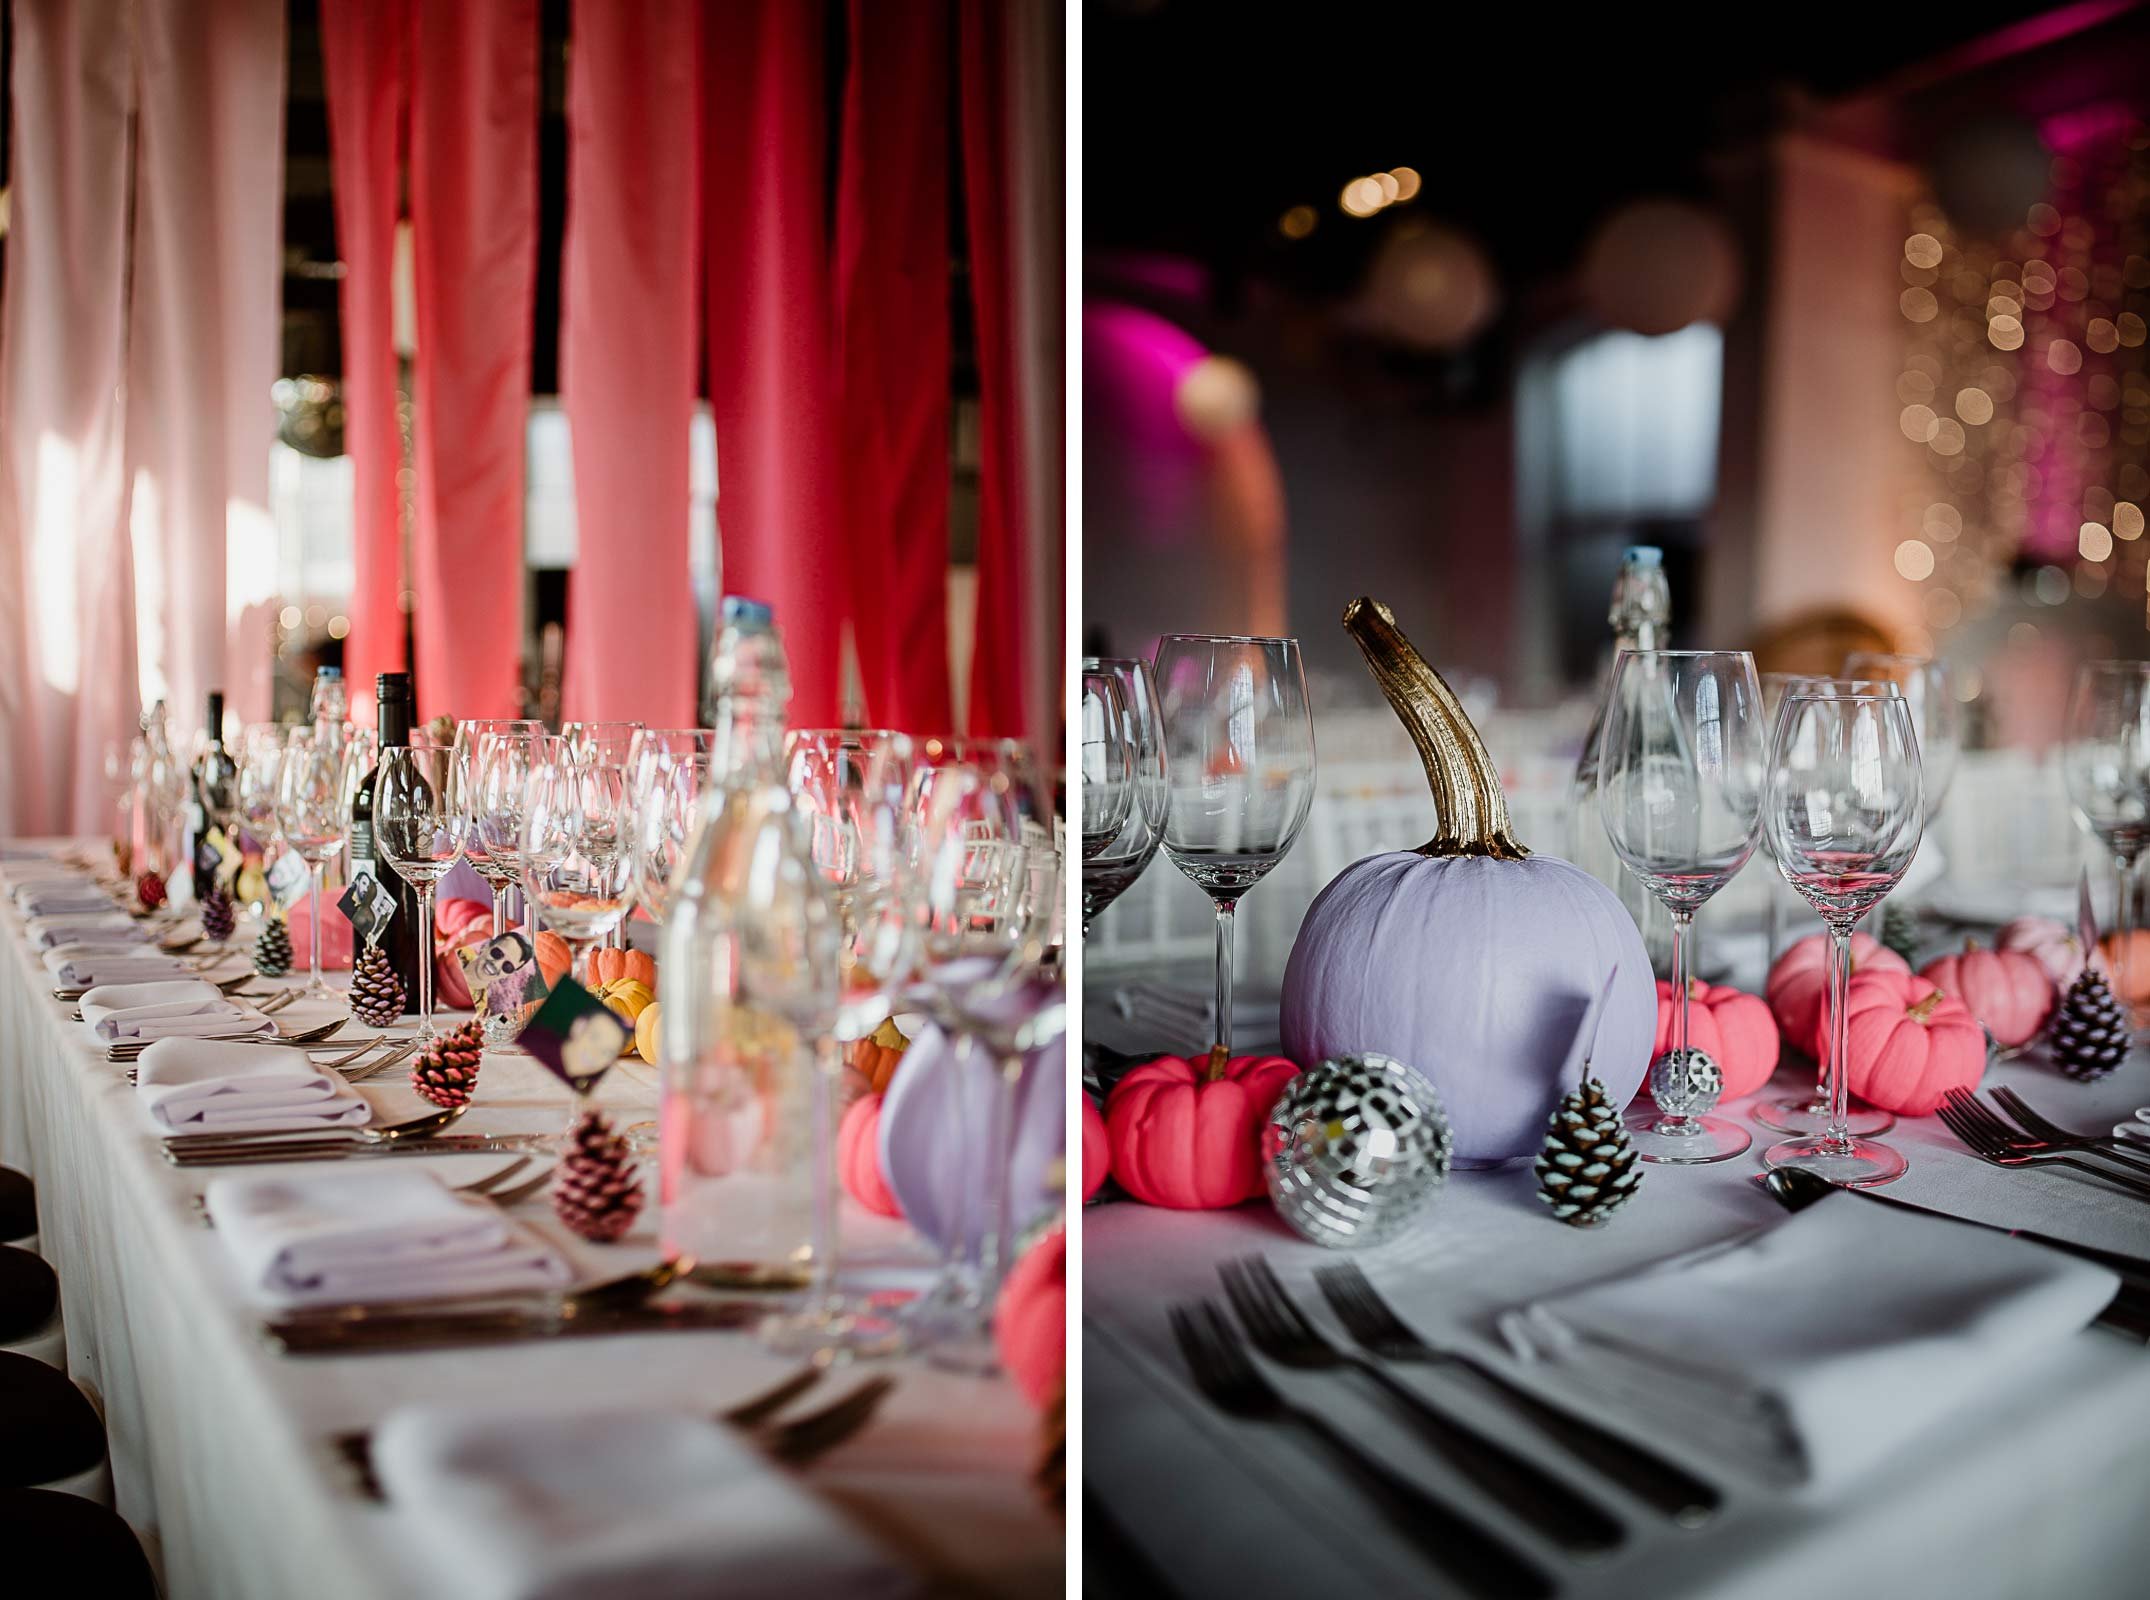 Disco inspired wedding table decorations